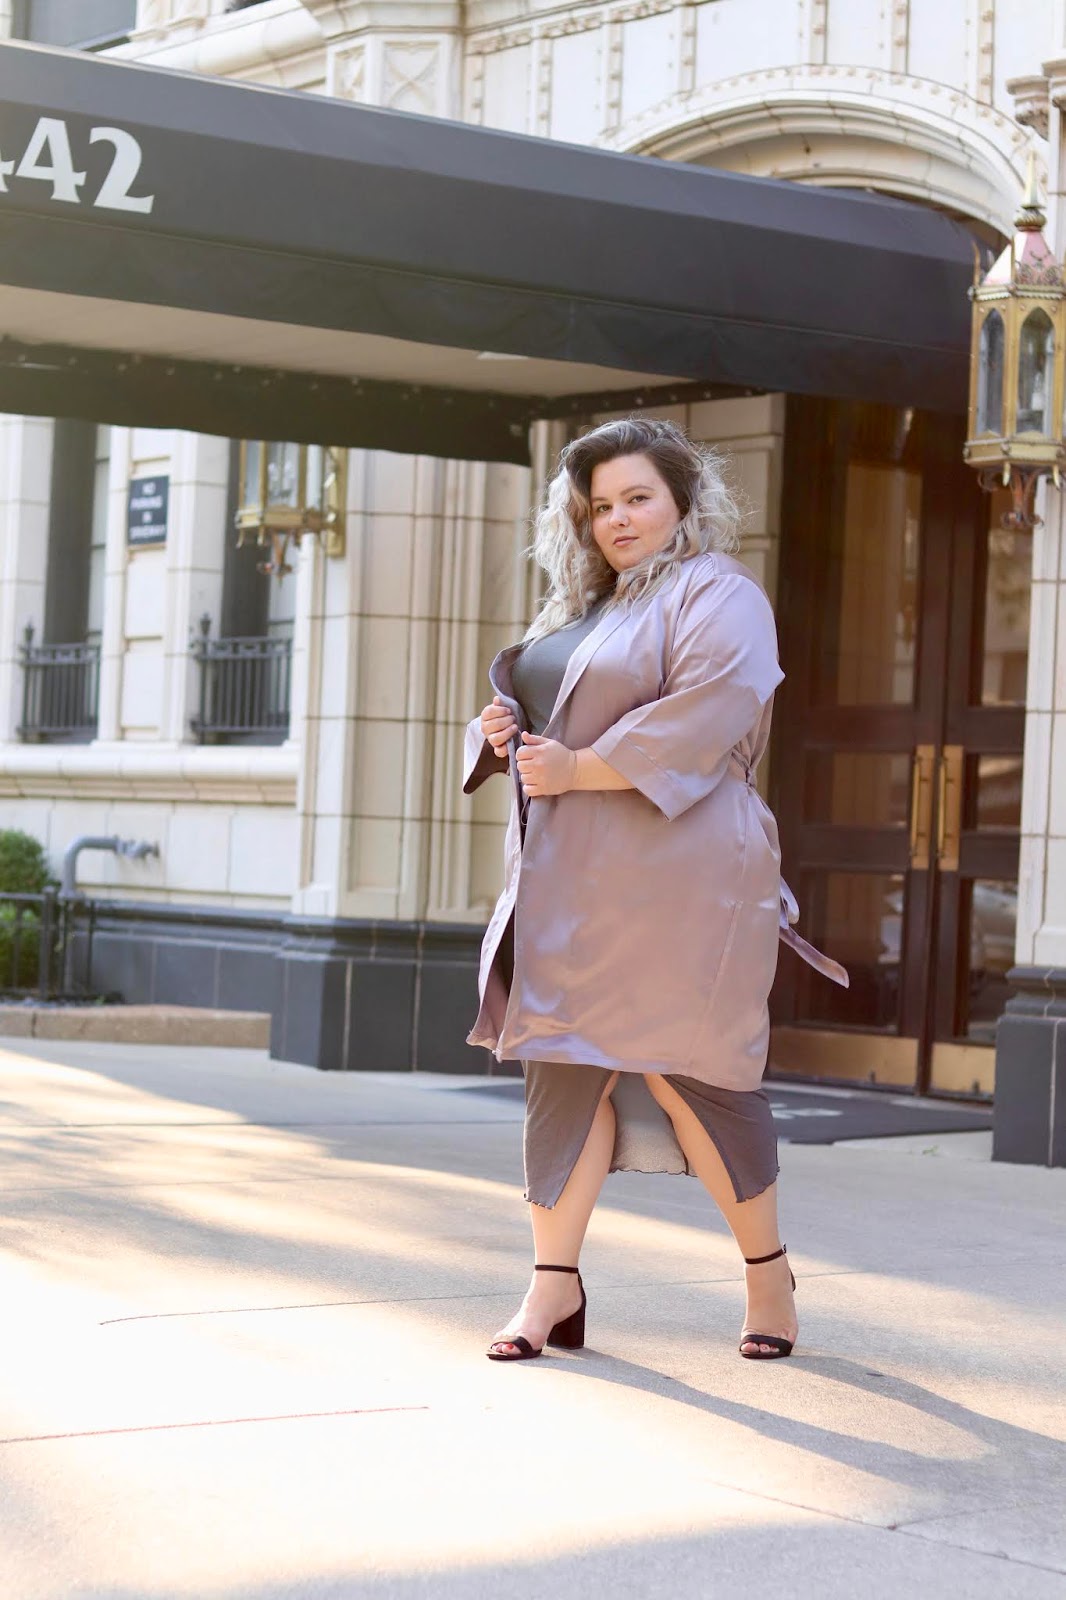 Chicago Plus Size Petite Fashion Blogger, influencer, YouTuber, and model Natalie Craig, of Natalie in the City, reviews Soncy's satin robe kimono duster in lavender, and the brand's see through mesh dress with a slit.